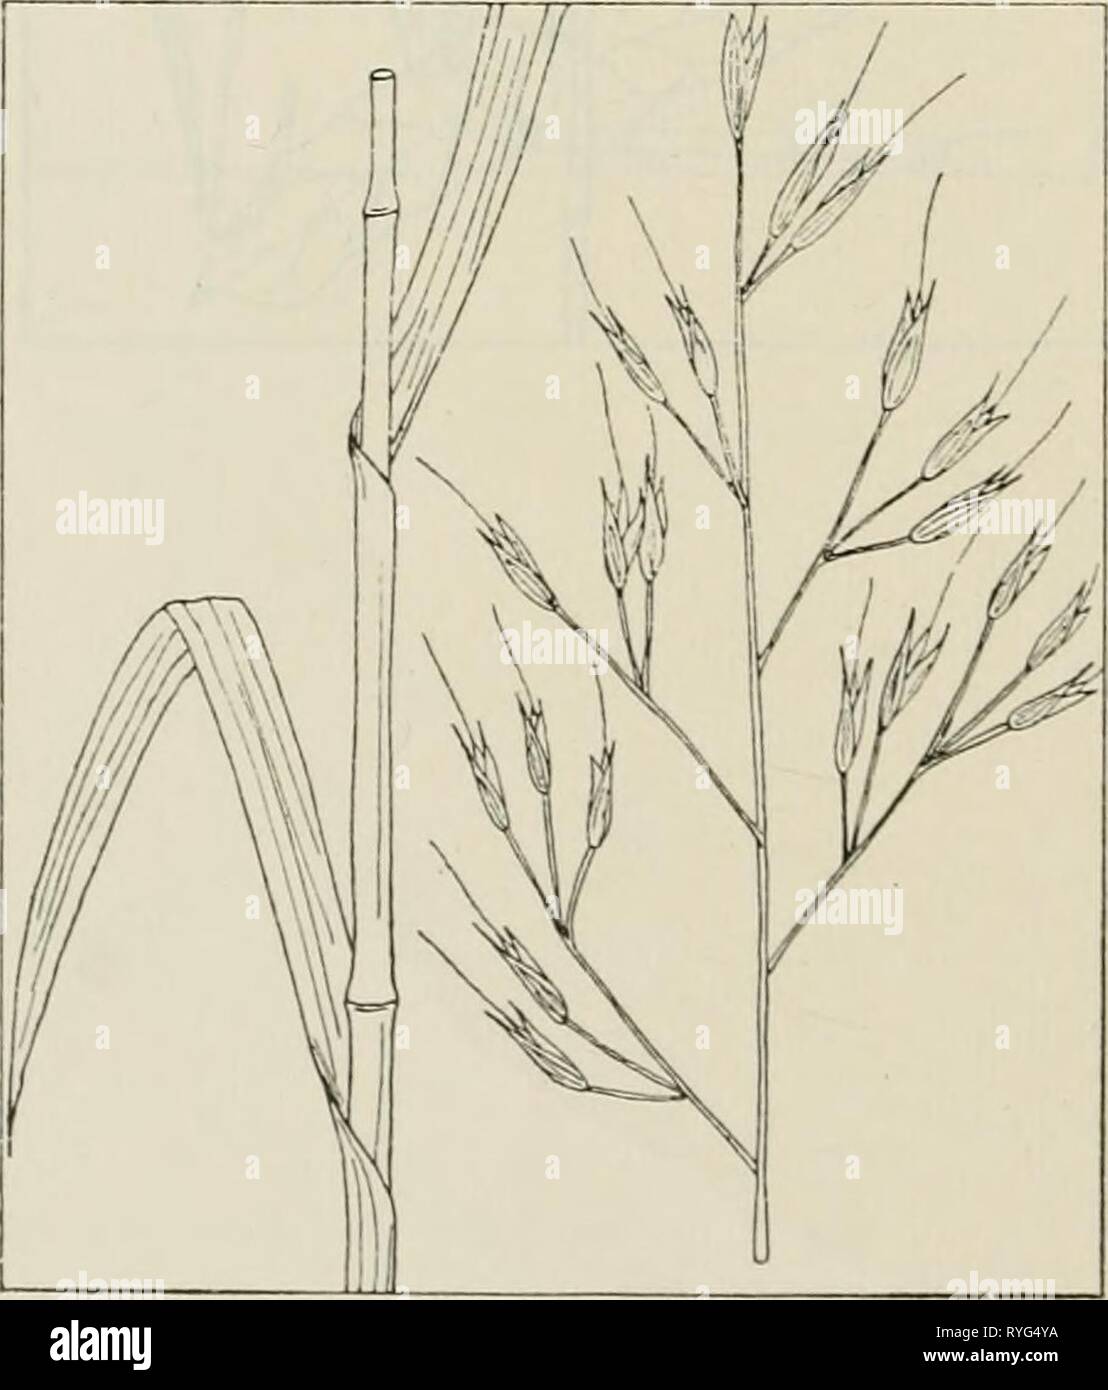 The drug plants of Illinois  drugplantsofilli44teho Year: 1951    ASPARAGUS OFFICINALIS L. Asparagus. Liliaceae. Root and seed collected. Grown com- mercially in several regions, also an occa- sional escape from gardens in all parts of the state. Contains asparagine. Used as a diuretic and aperient. ASPIDIUM MARGINALE (L.) Sw. Male fern, leatherwood fern, shield fern. Polypodiaceae. U. S. P. XI, p. 246.—An herbaceous, evergreen fern 1 to 2 feet tall, perennial; rhizome densely covered with glossy brown chaff, 3 to 6 inches long, I/2 to 1 inch thick, with stipe remnants 2 to 3 inches in diamete Stock Photo